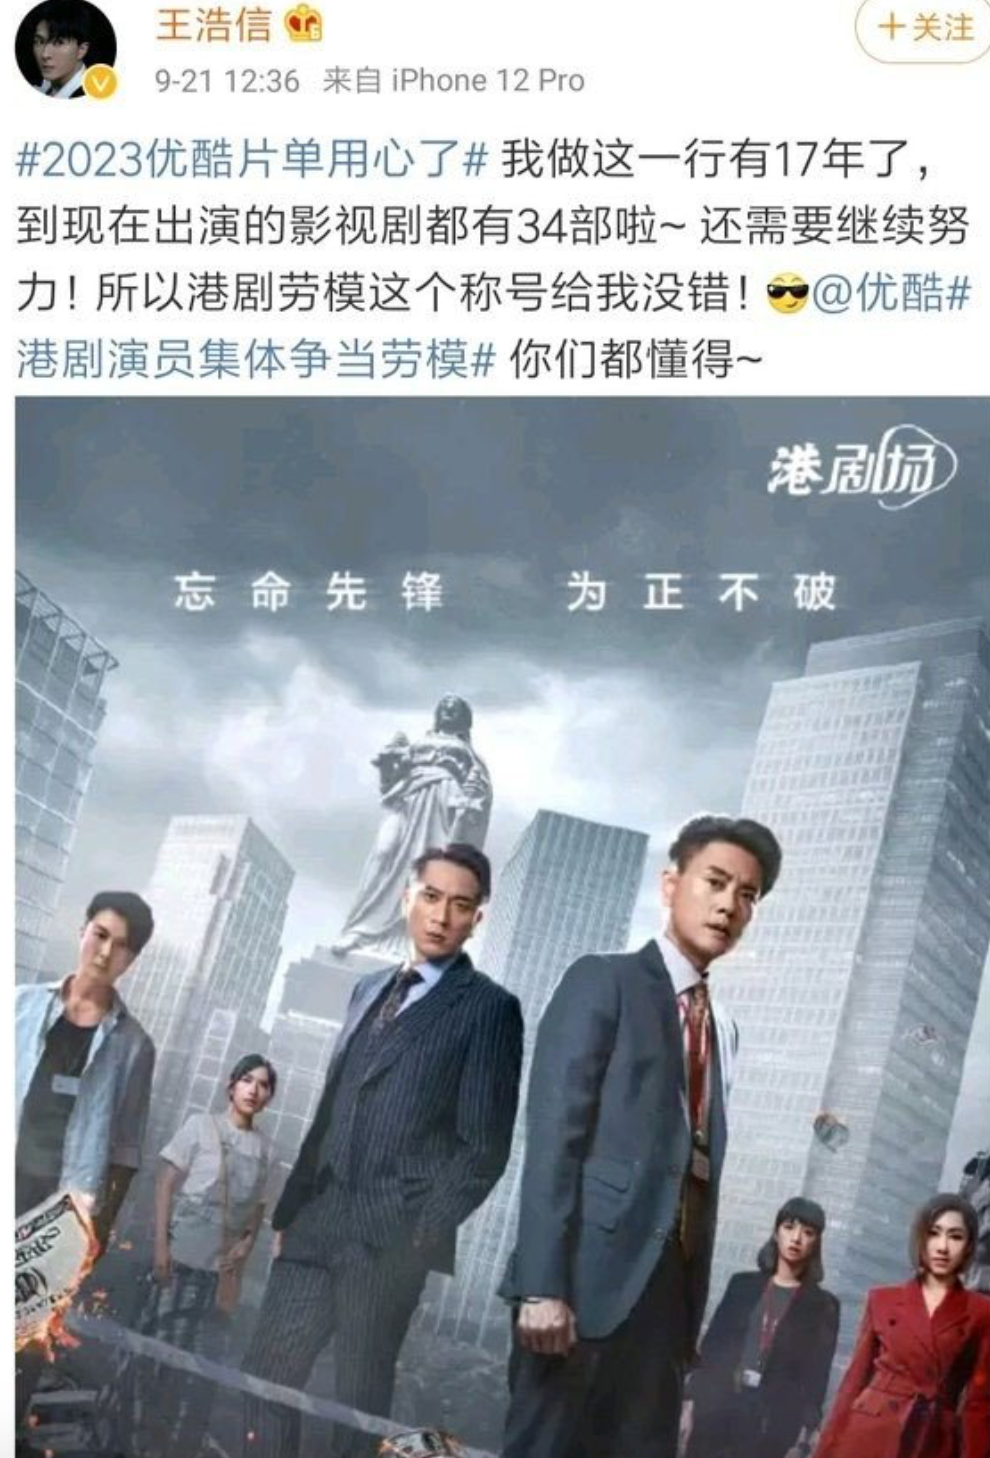 Nancy Wu removed from poster